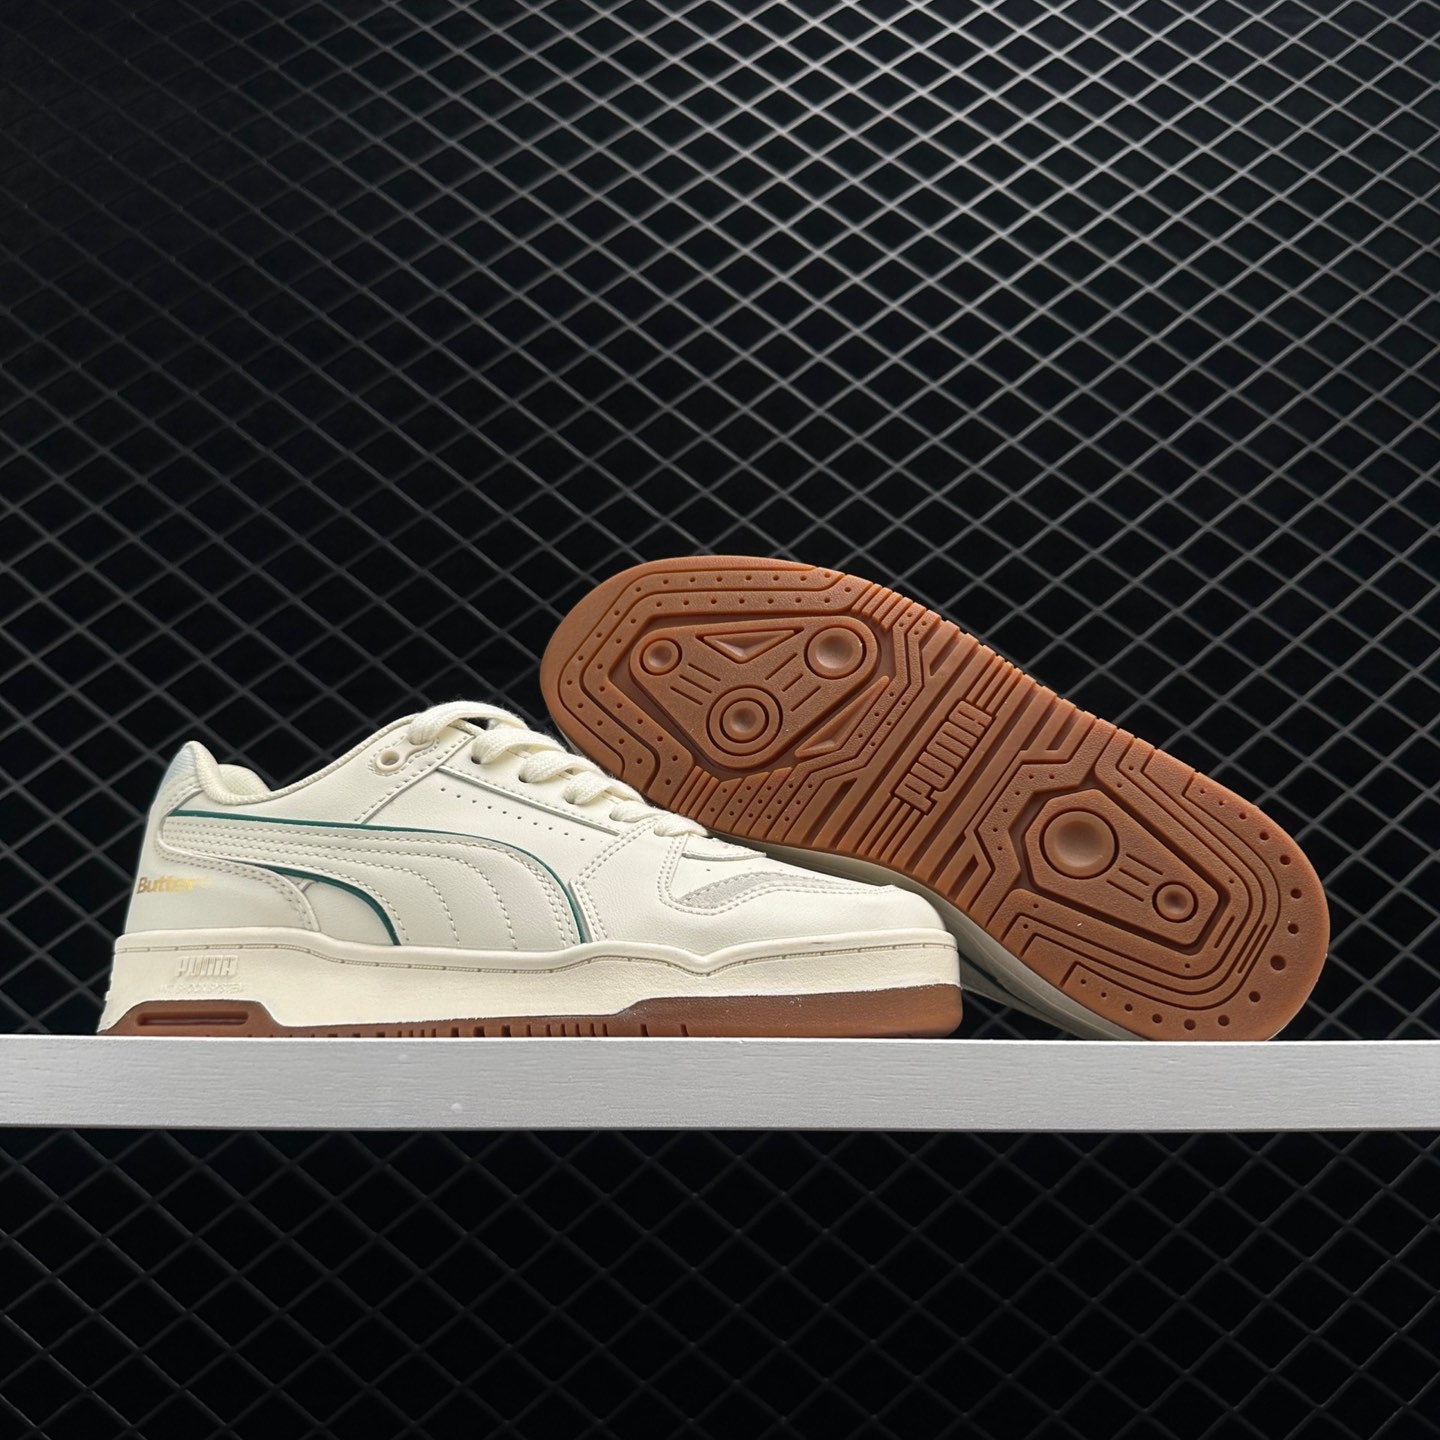 PUMA Butter Goods x Slipstream Low 'Whisper White' Sneakers – Exclusive Collaboration with 381787-01